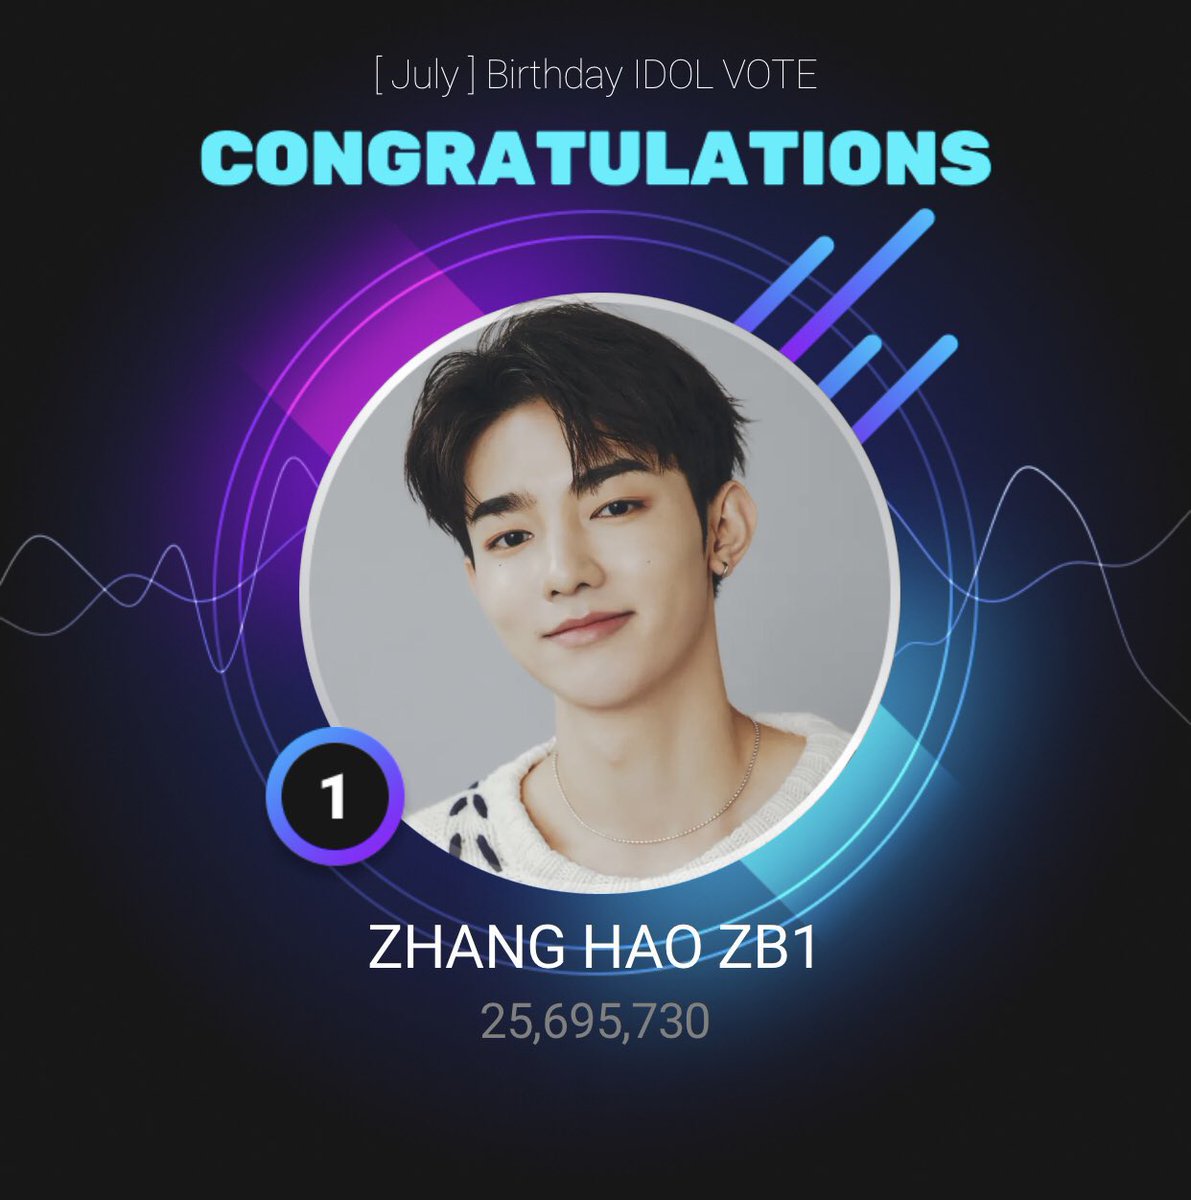 Congratulations  #ZHANGHAO 🎉

ZHANG HAO won 1st place in UPICK and will receive Airport Railroad Digital Signage as a reward 🎁 

Thank you Rosins and Ze_roses for contributing to Zhang Hao’s success in July birthday poll on UPICK. Let’s keep supporting his other Birthday…